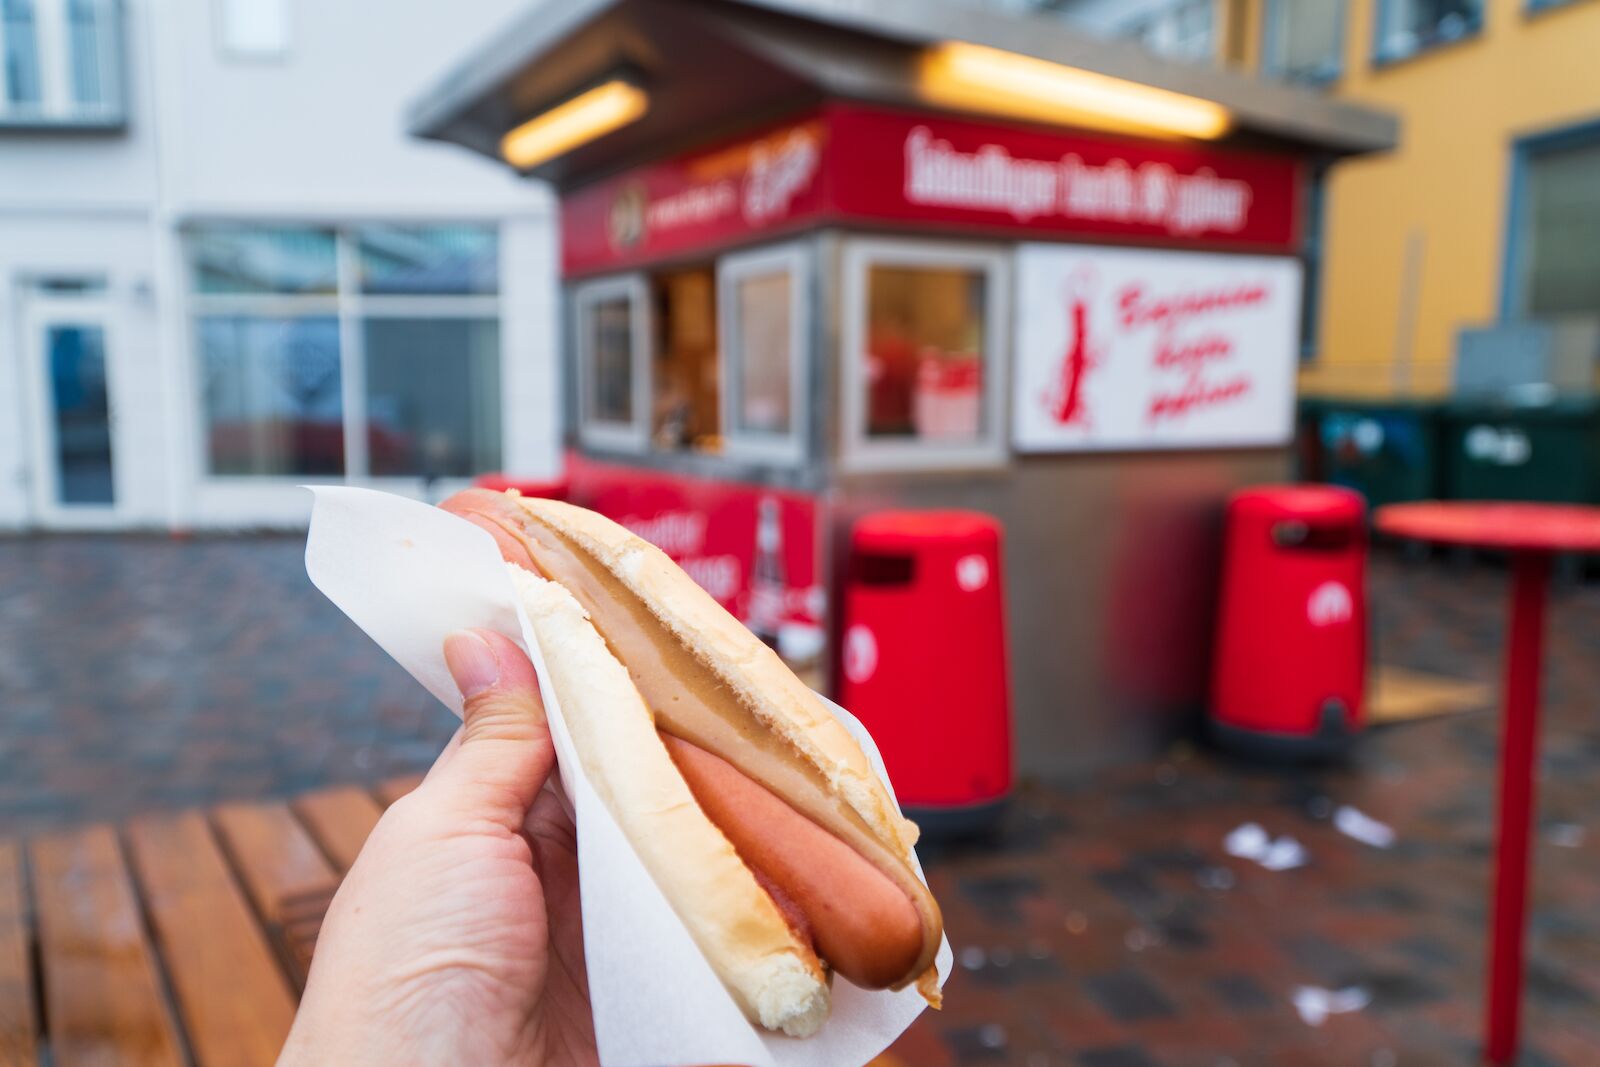 Person holding a hot dog in front of a hot dog stand in Iceland. Do you know how to say "I want a hot dog with everything on it" in Icelandic?